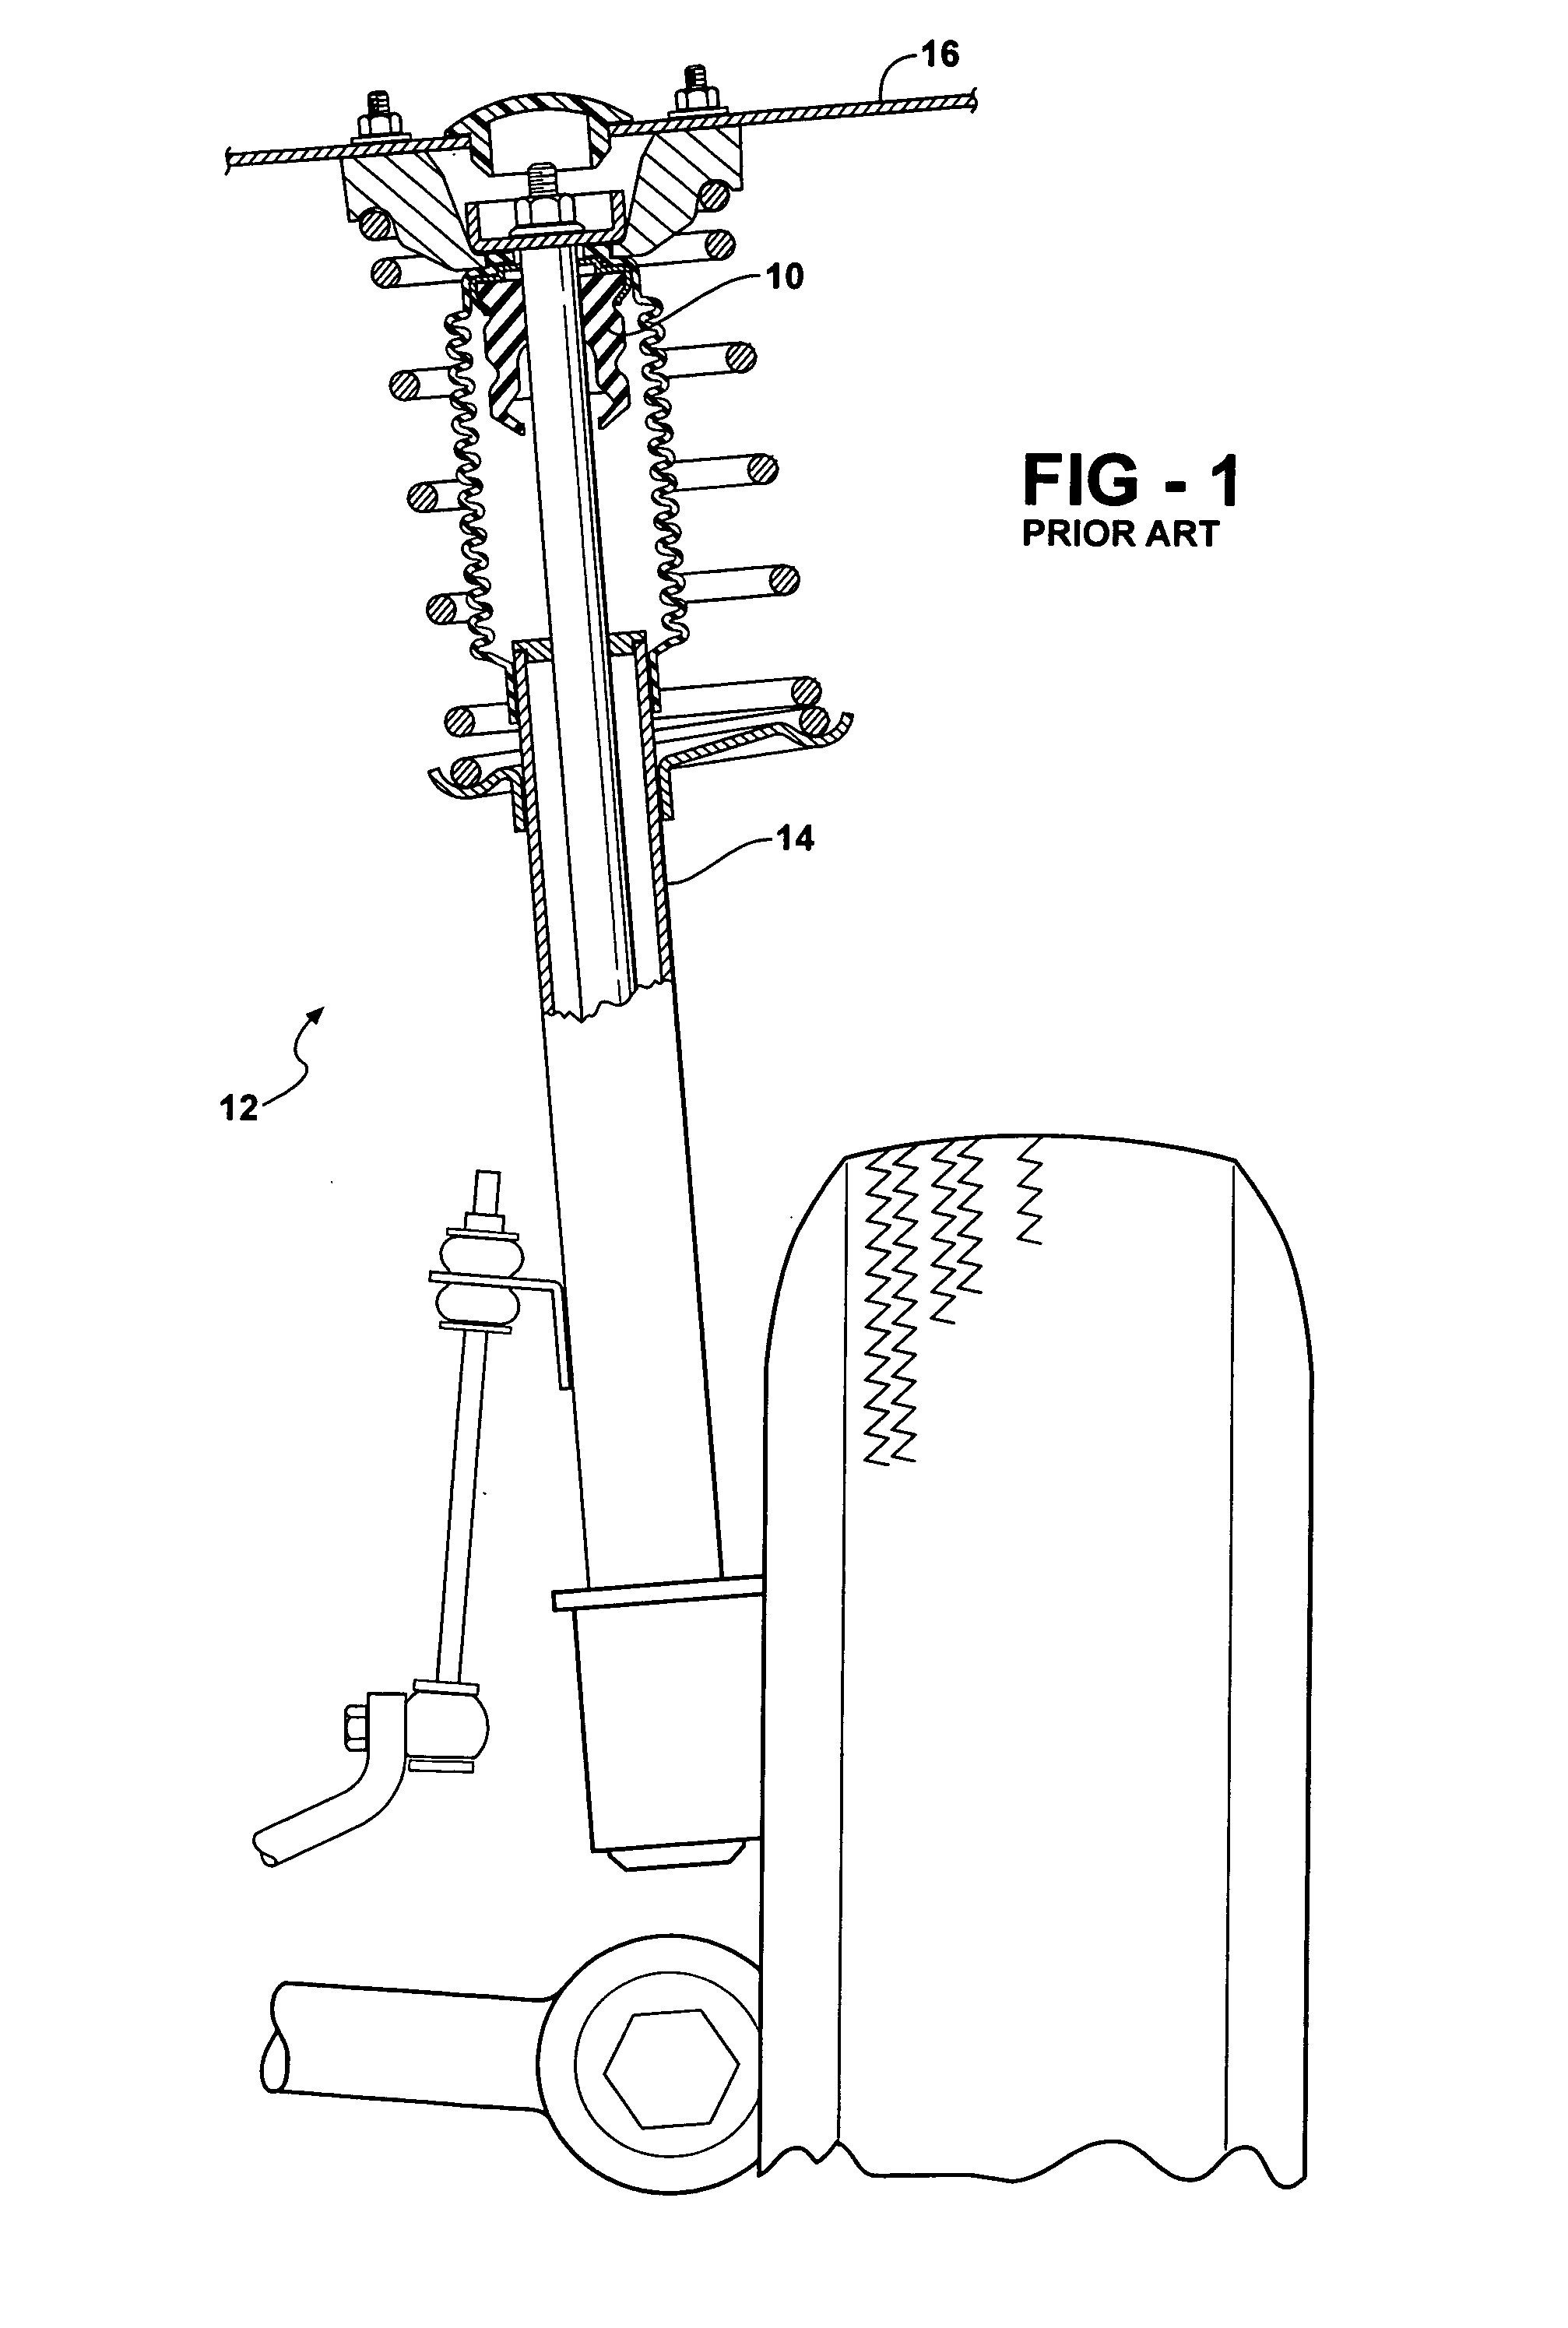 Jounce assembly for a suspension system